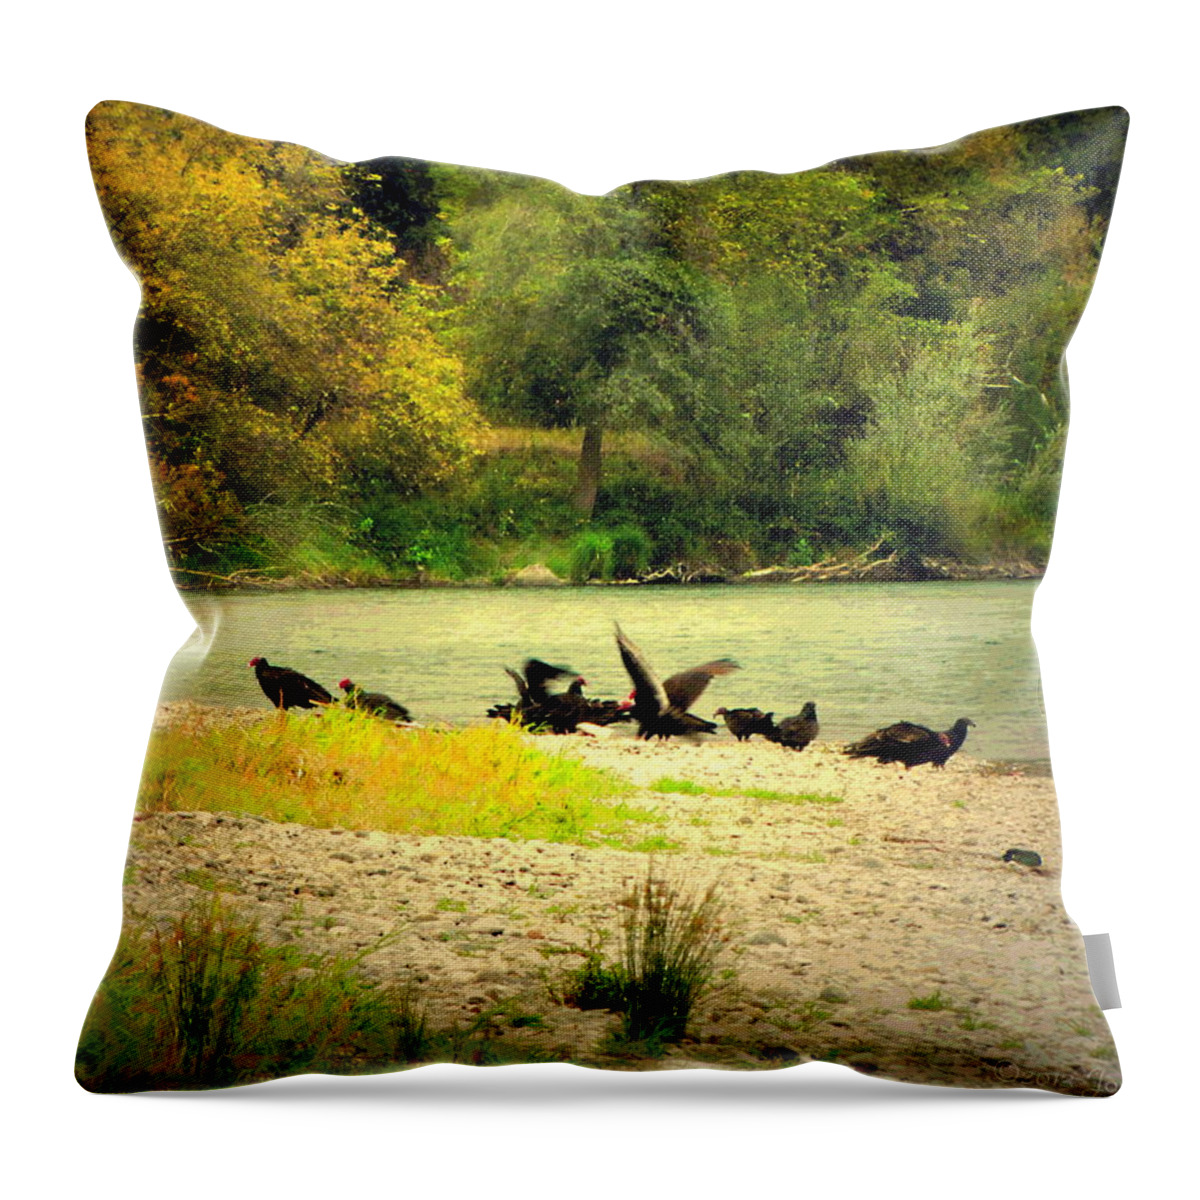 Turkey-vulture Throw Pillow featuring the photograph The Turkey Vulture Feast by Joyce Dickens